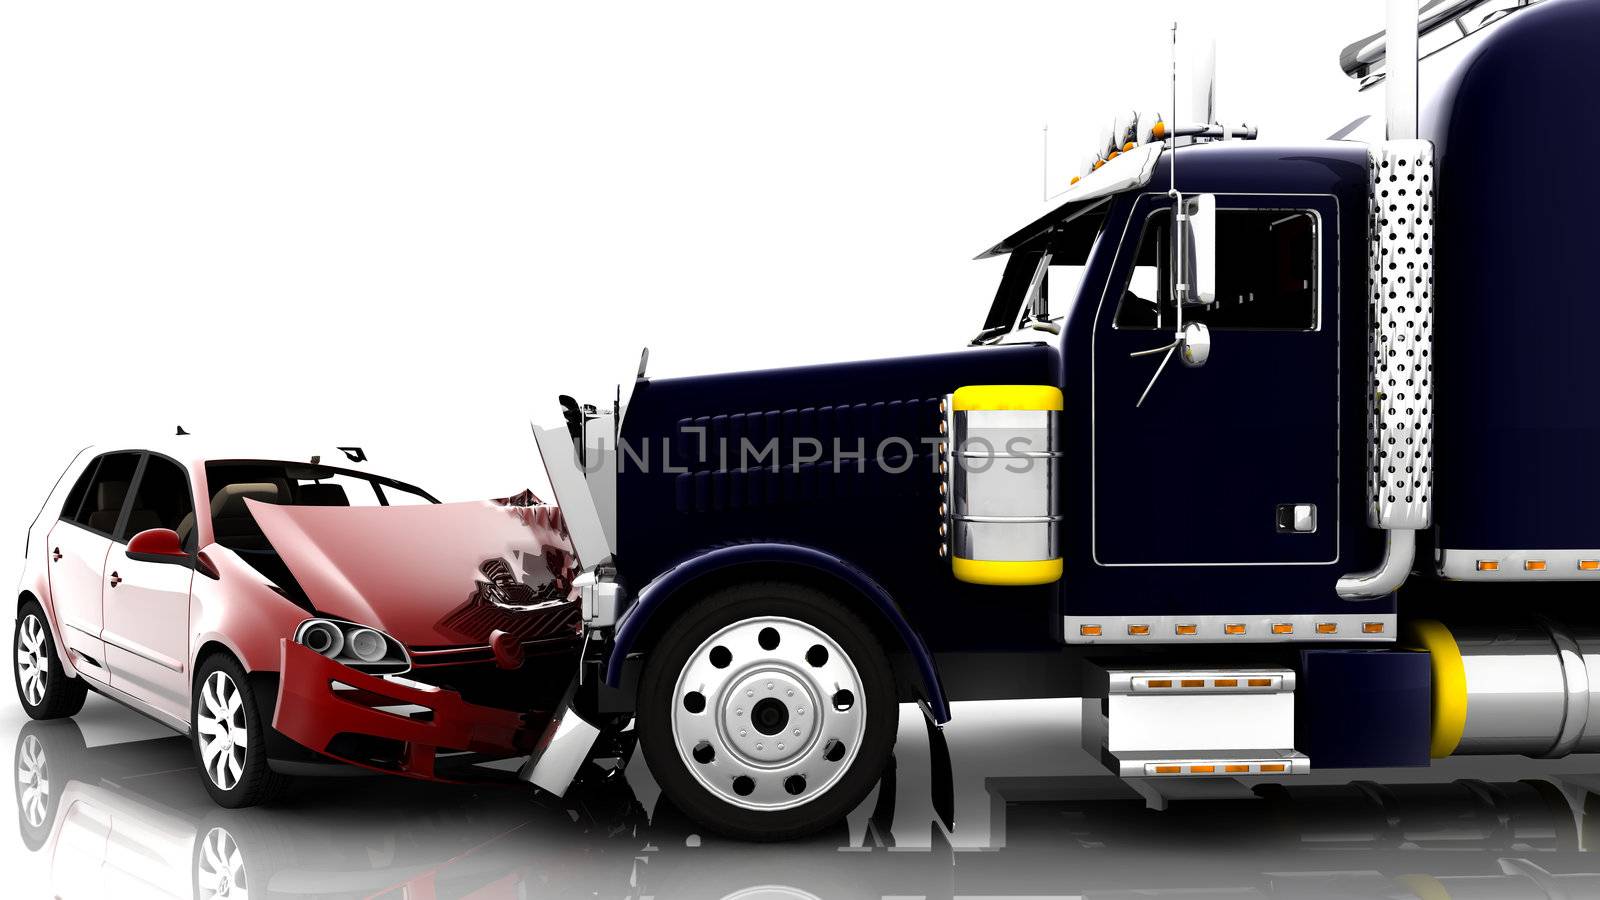 Accident between a car and a truck by cla78